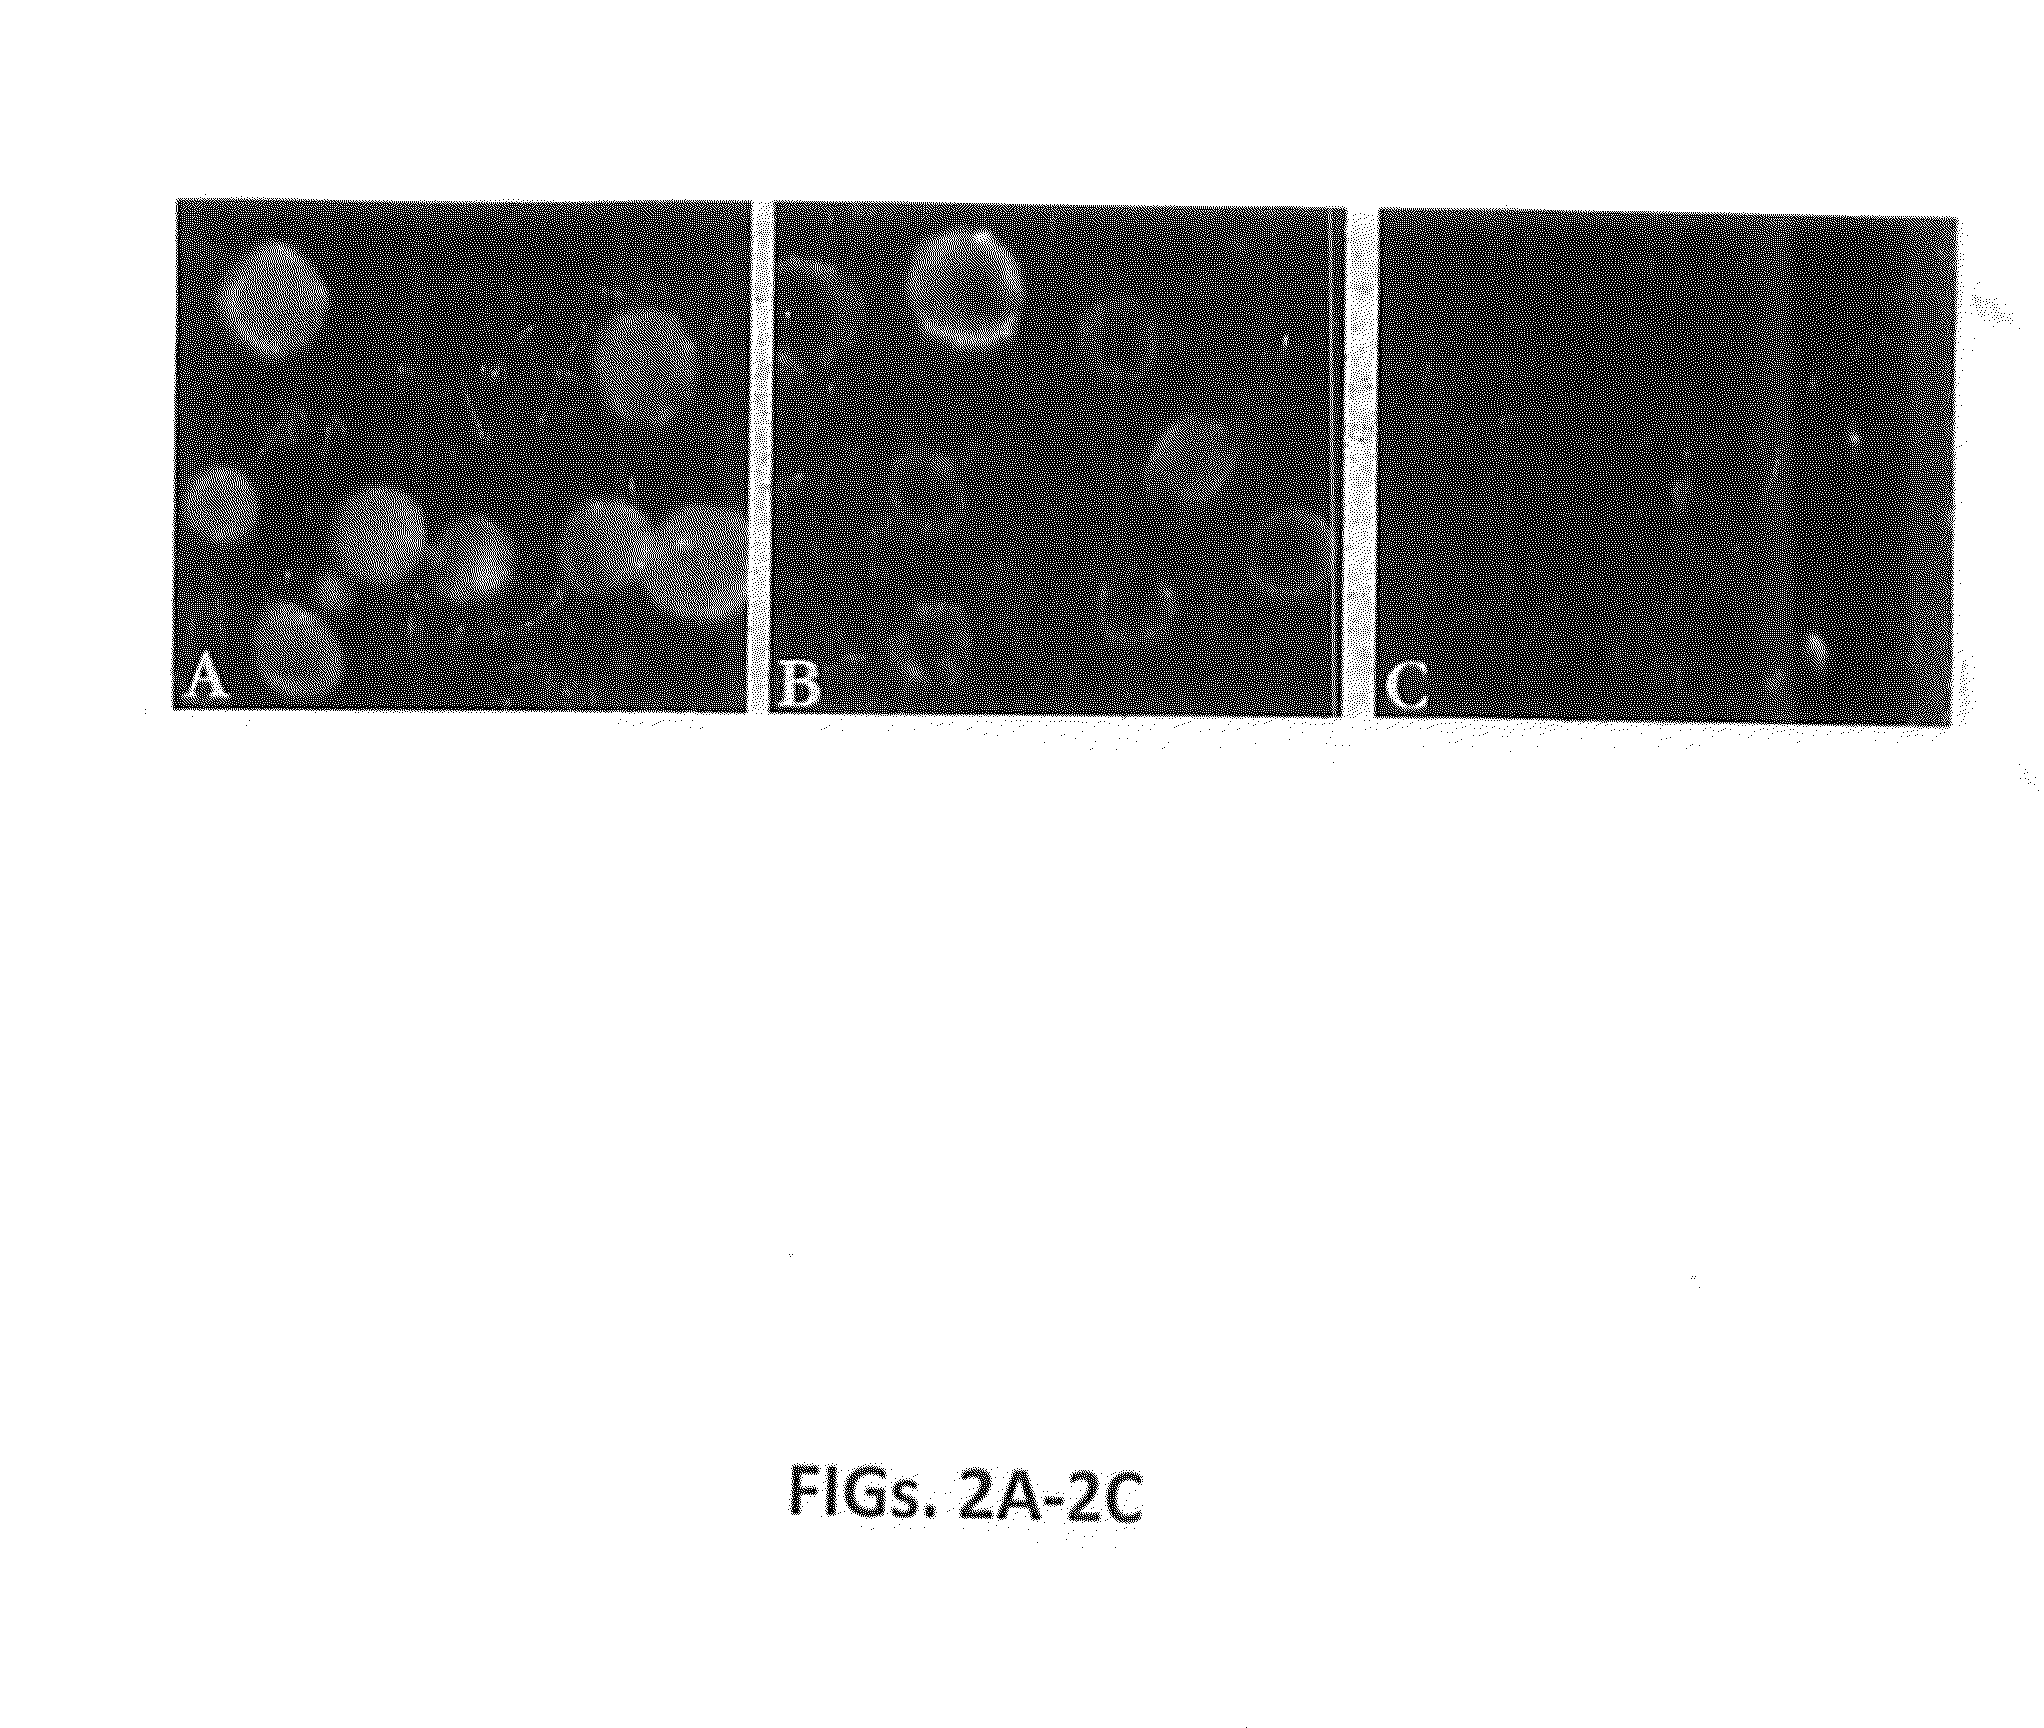 Pancreatic cancer associated antigen, antibody thereto, and diagnostic and treatment methods